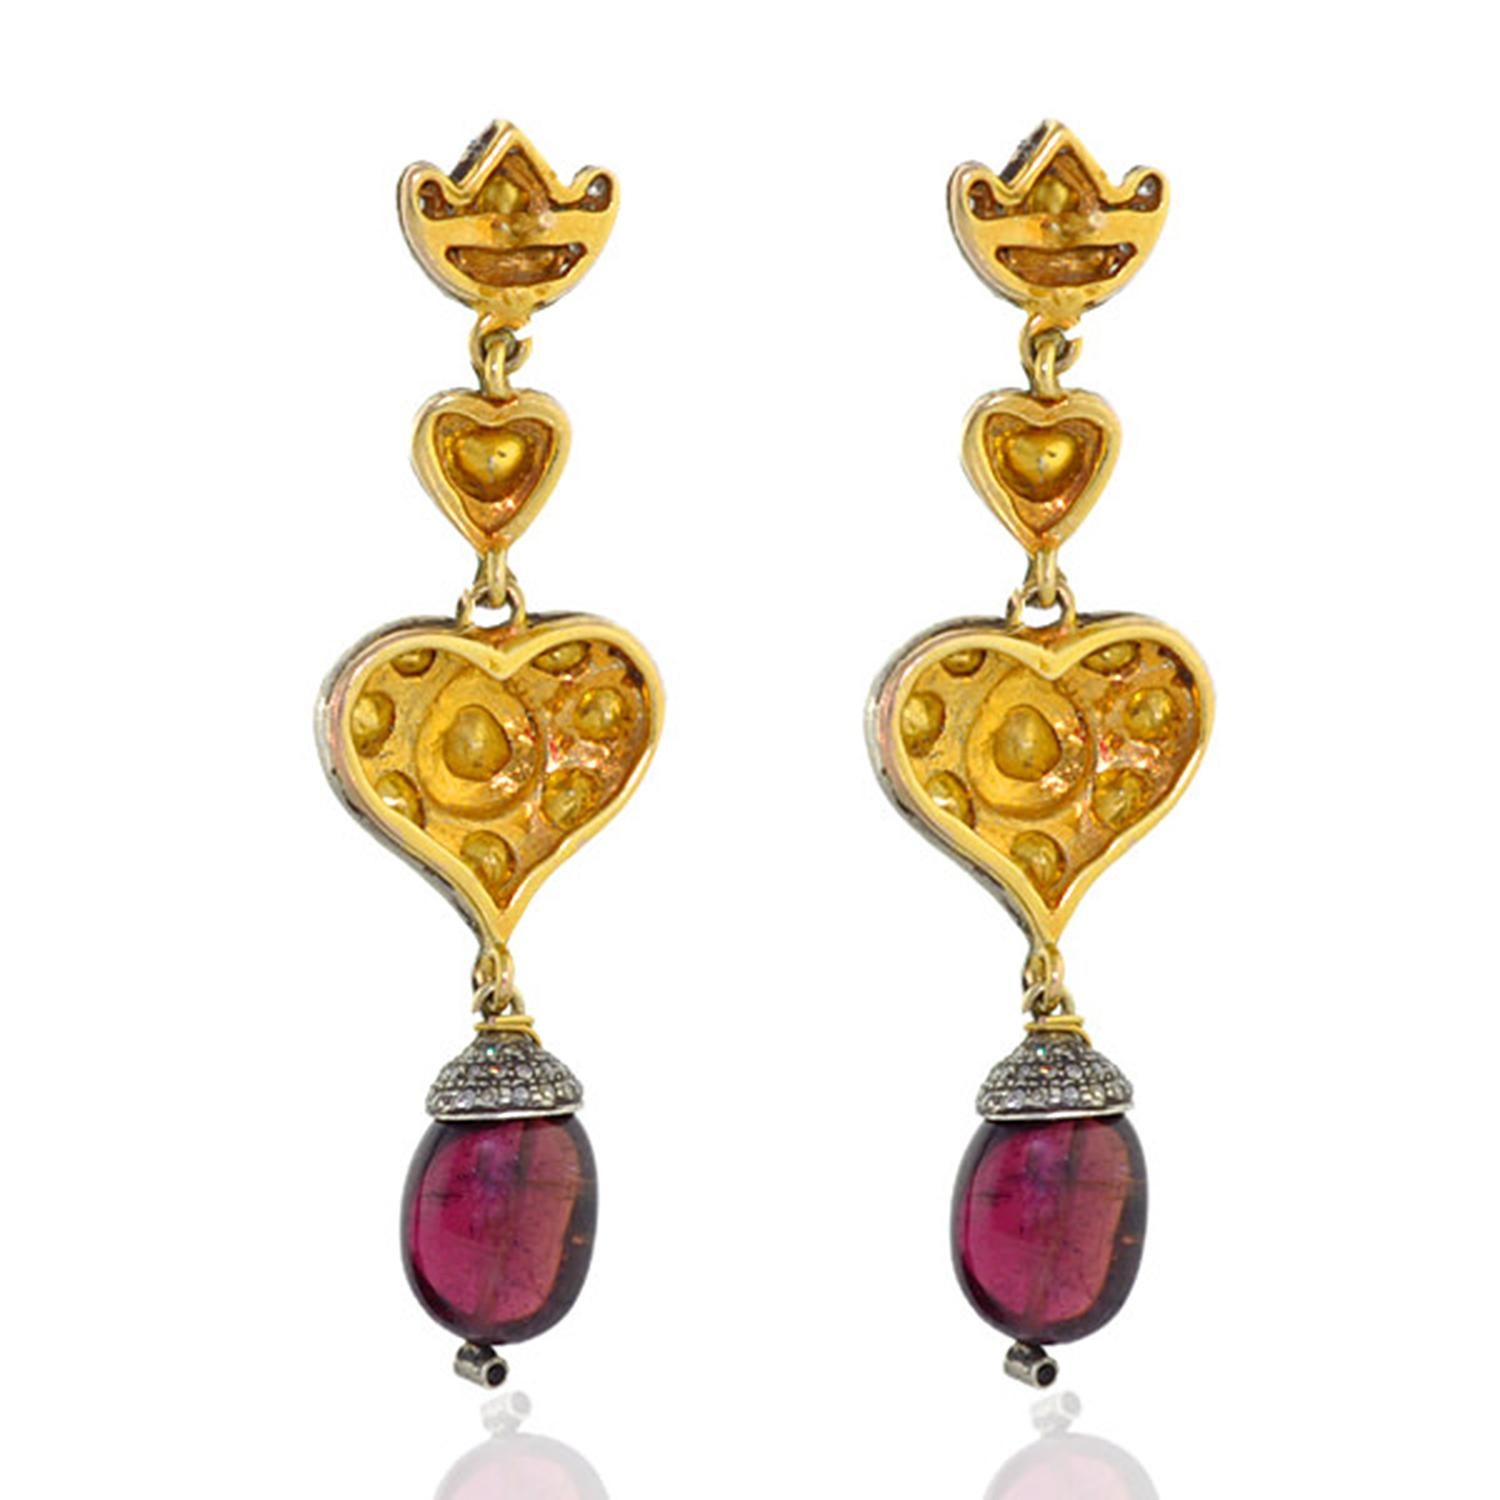 Cast from 14-karat gold & sterling silver, these antique style earrings are hand set with 13.55 carats tourmaline and 1.7 carats rose cut diamonds.

FOLLOW  MEGHNA JEWELS storefront to view the latest collection & exclusive pieces.  Meghna Jewels is